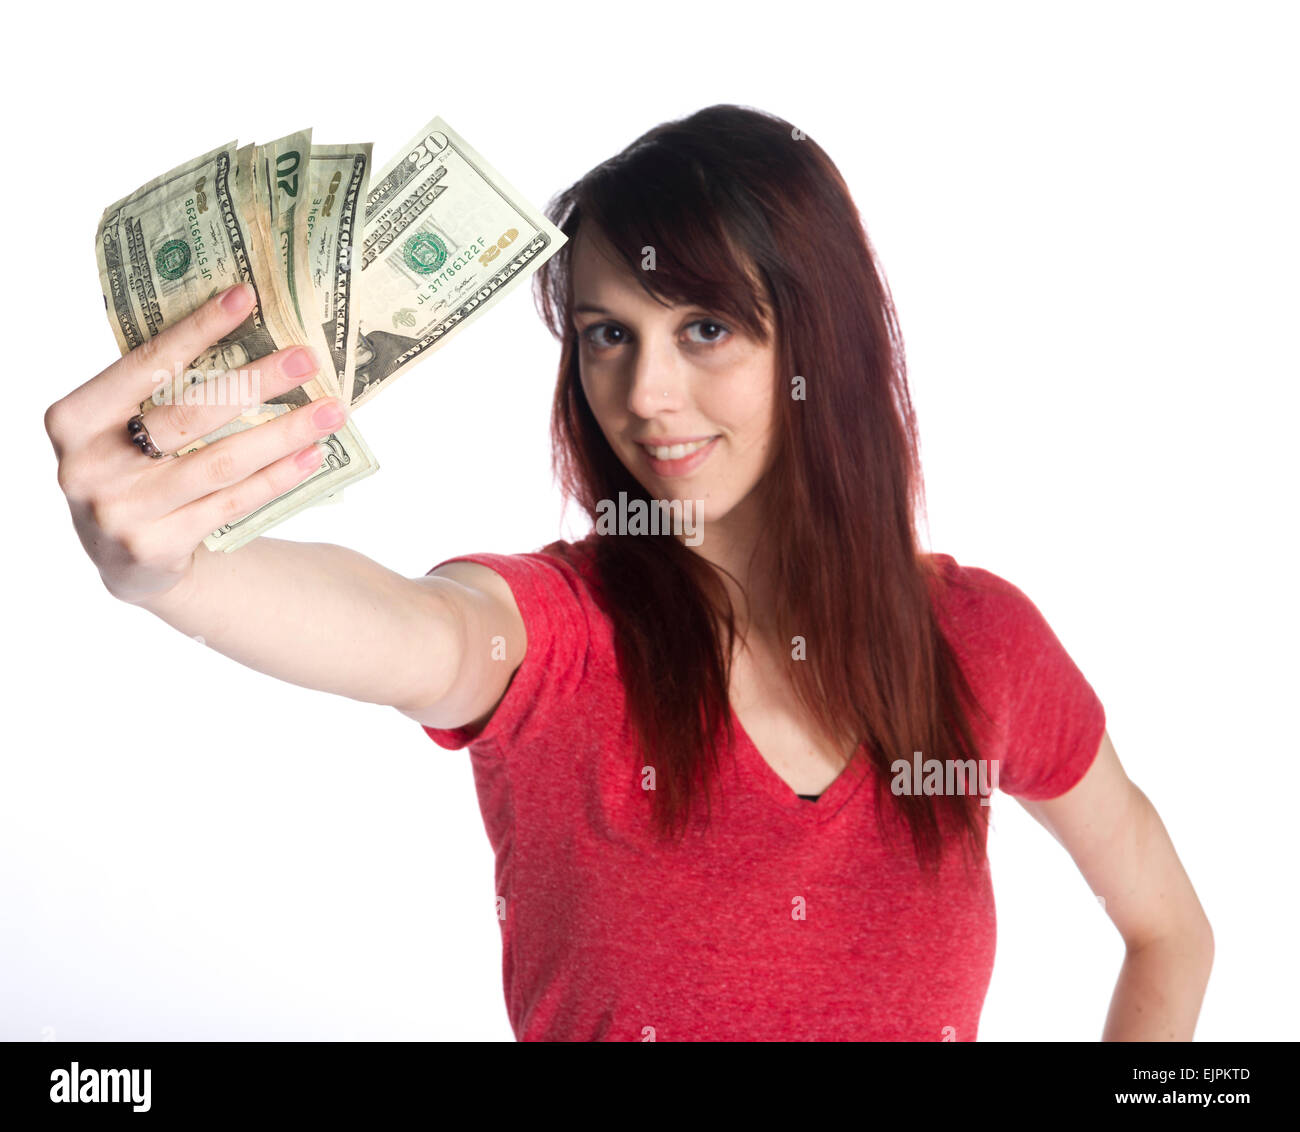 Smiling Woman Holding a Fan of 20 US Dollar Bills Stock Photo